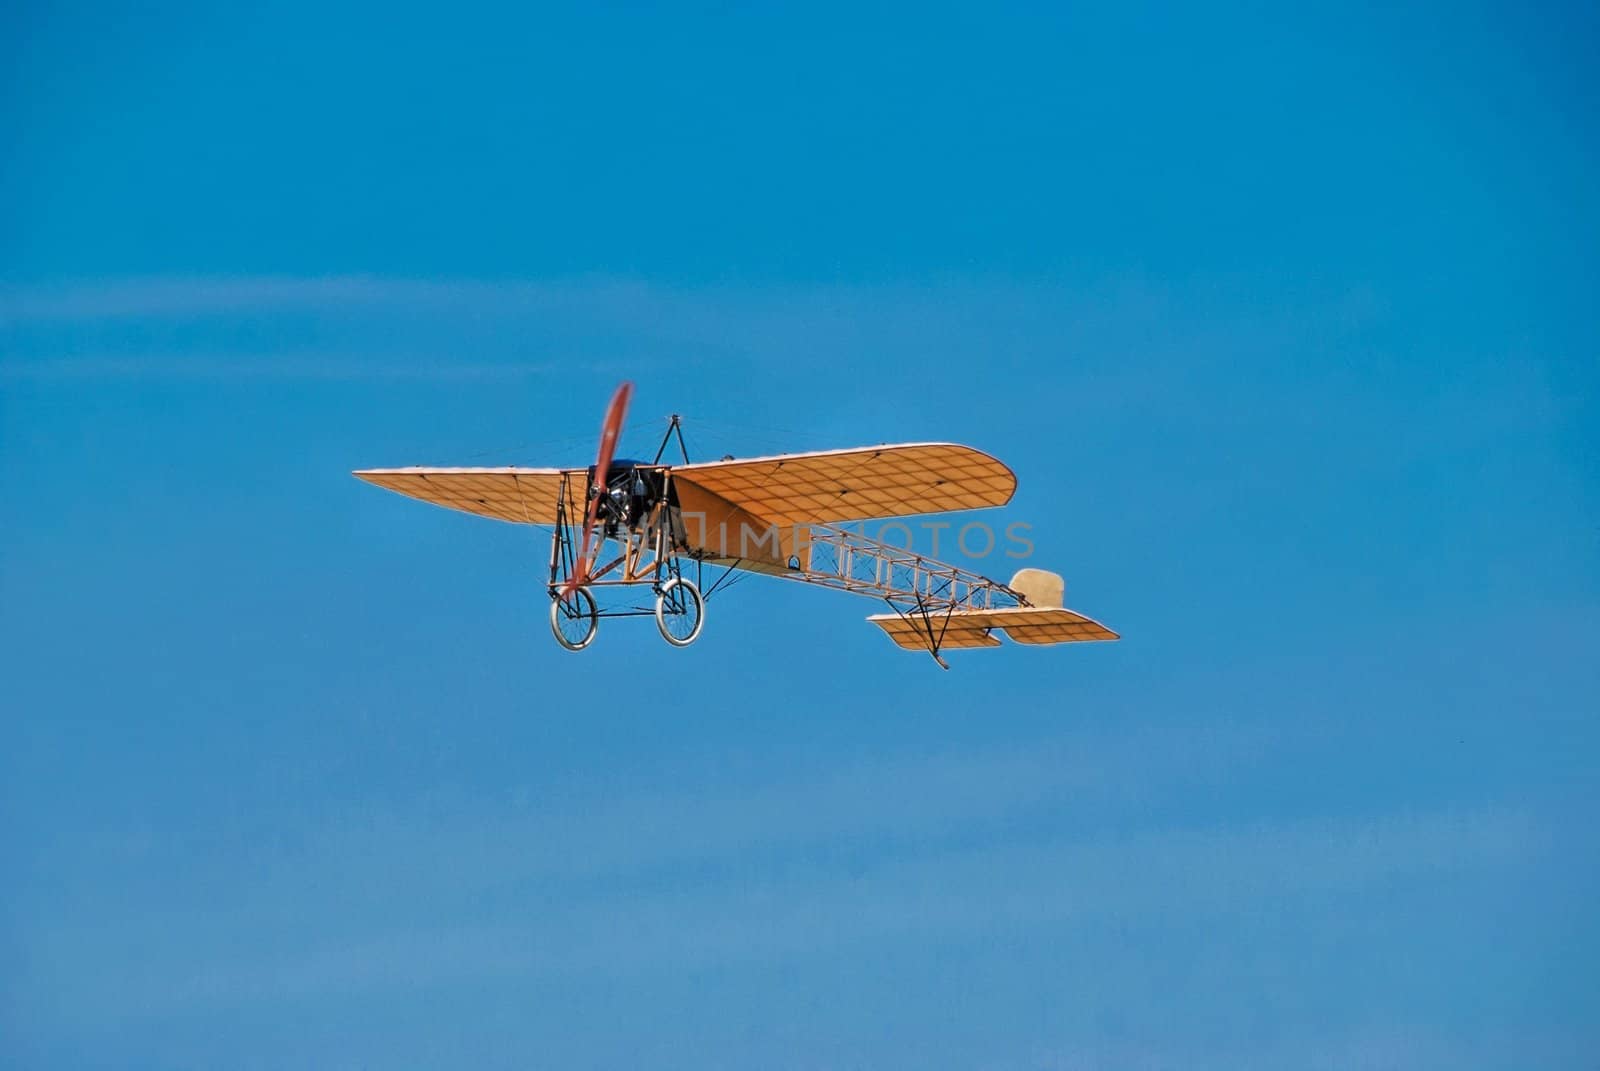 Bleriot x1 was the first heavier than air plane to cross the English channel